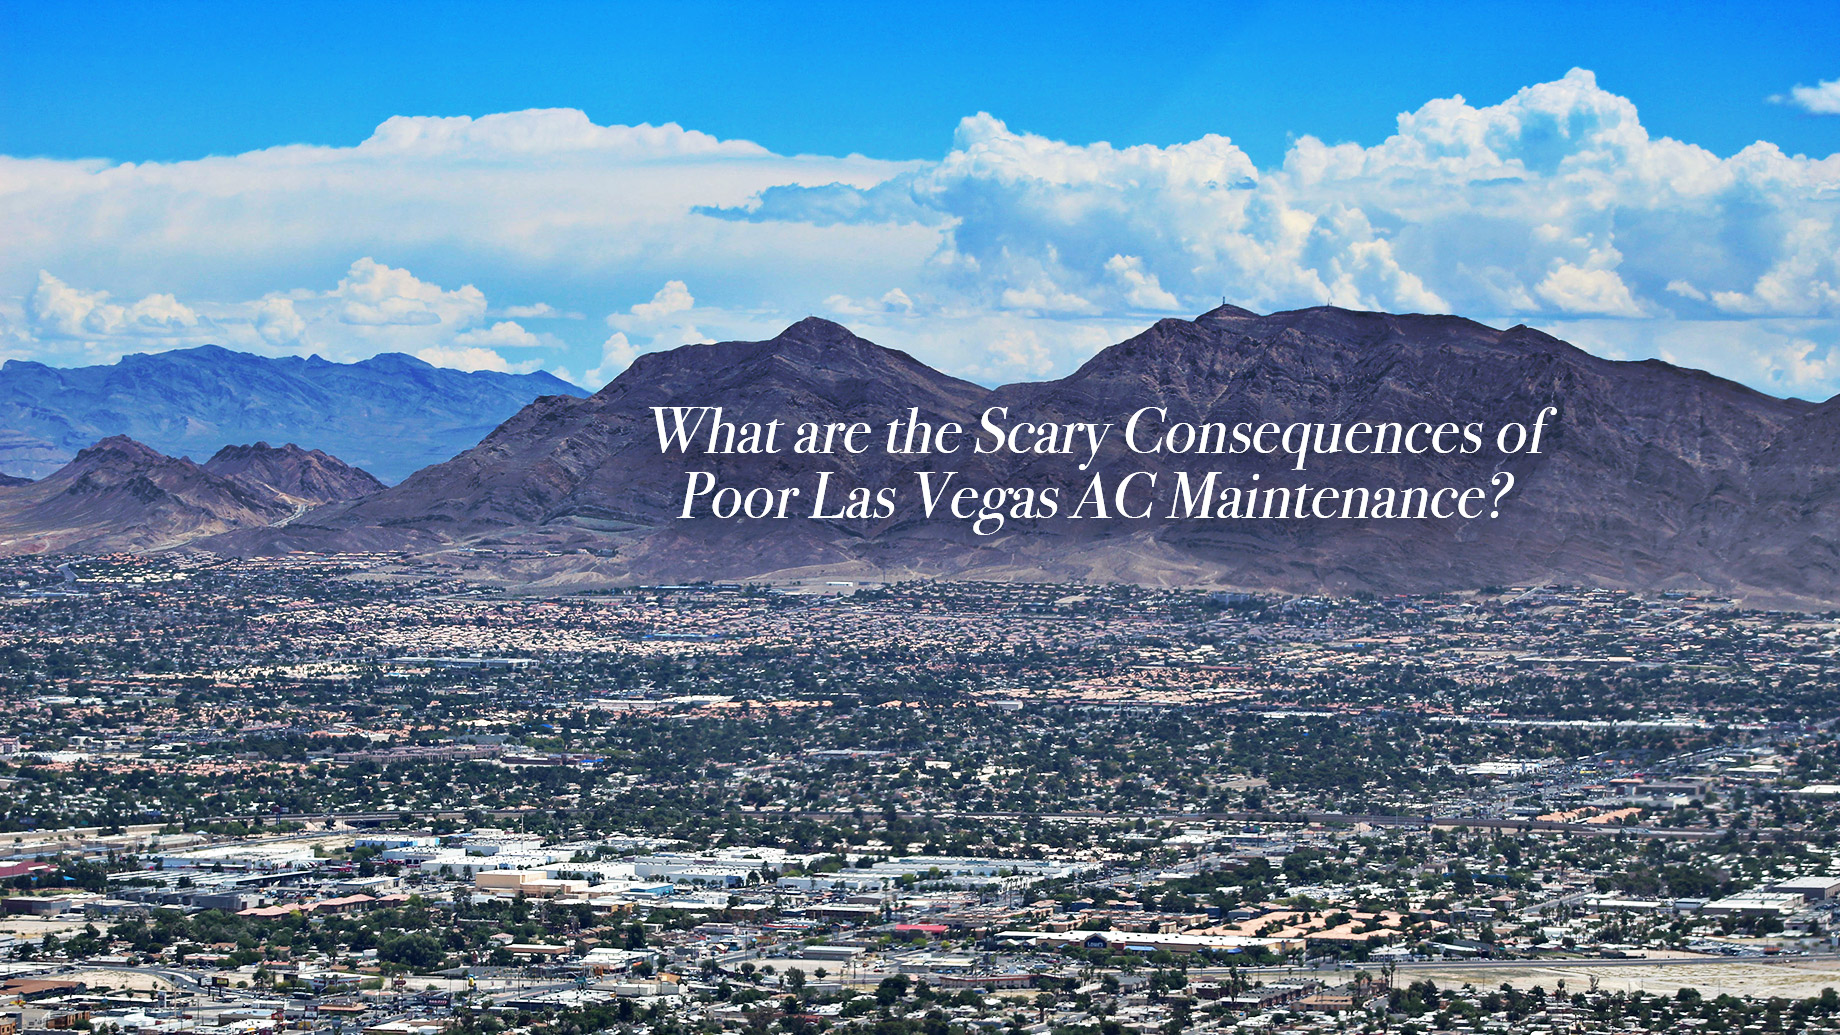 What are the Scary Consequences of Poor Las Vegas AC Maintenance?